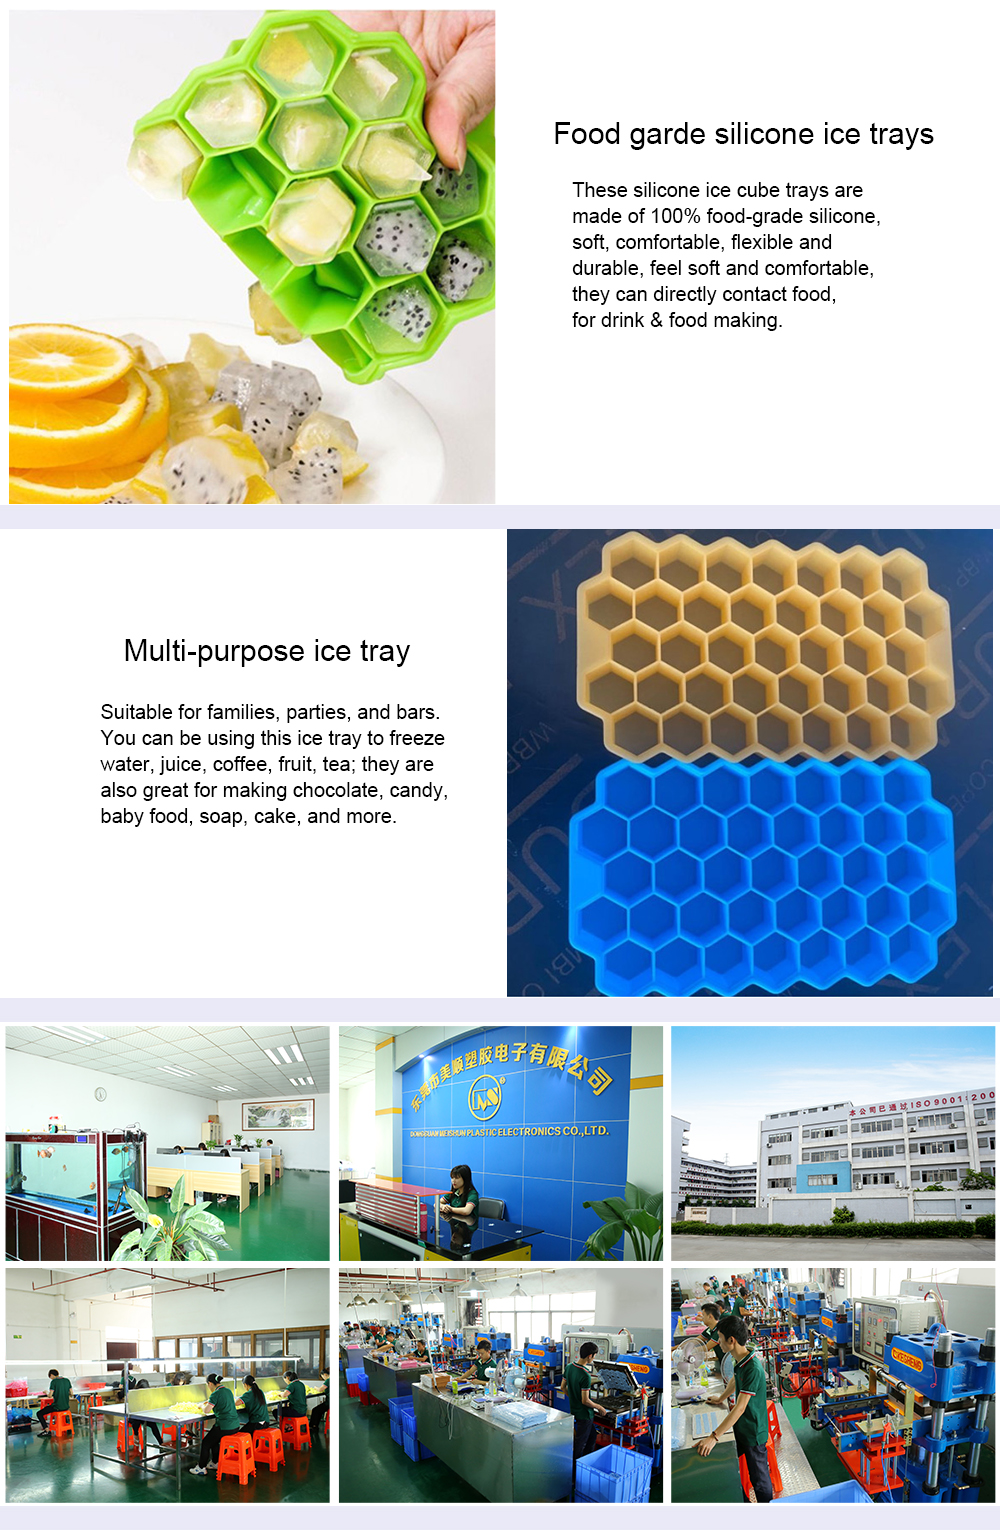 lego ice cube tray, China, suppliers, manufacturers, factory, customized